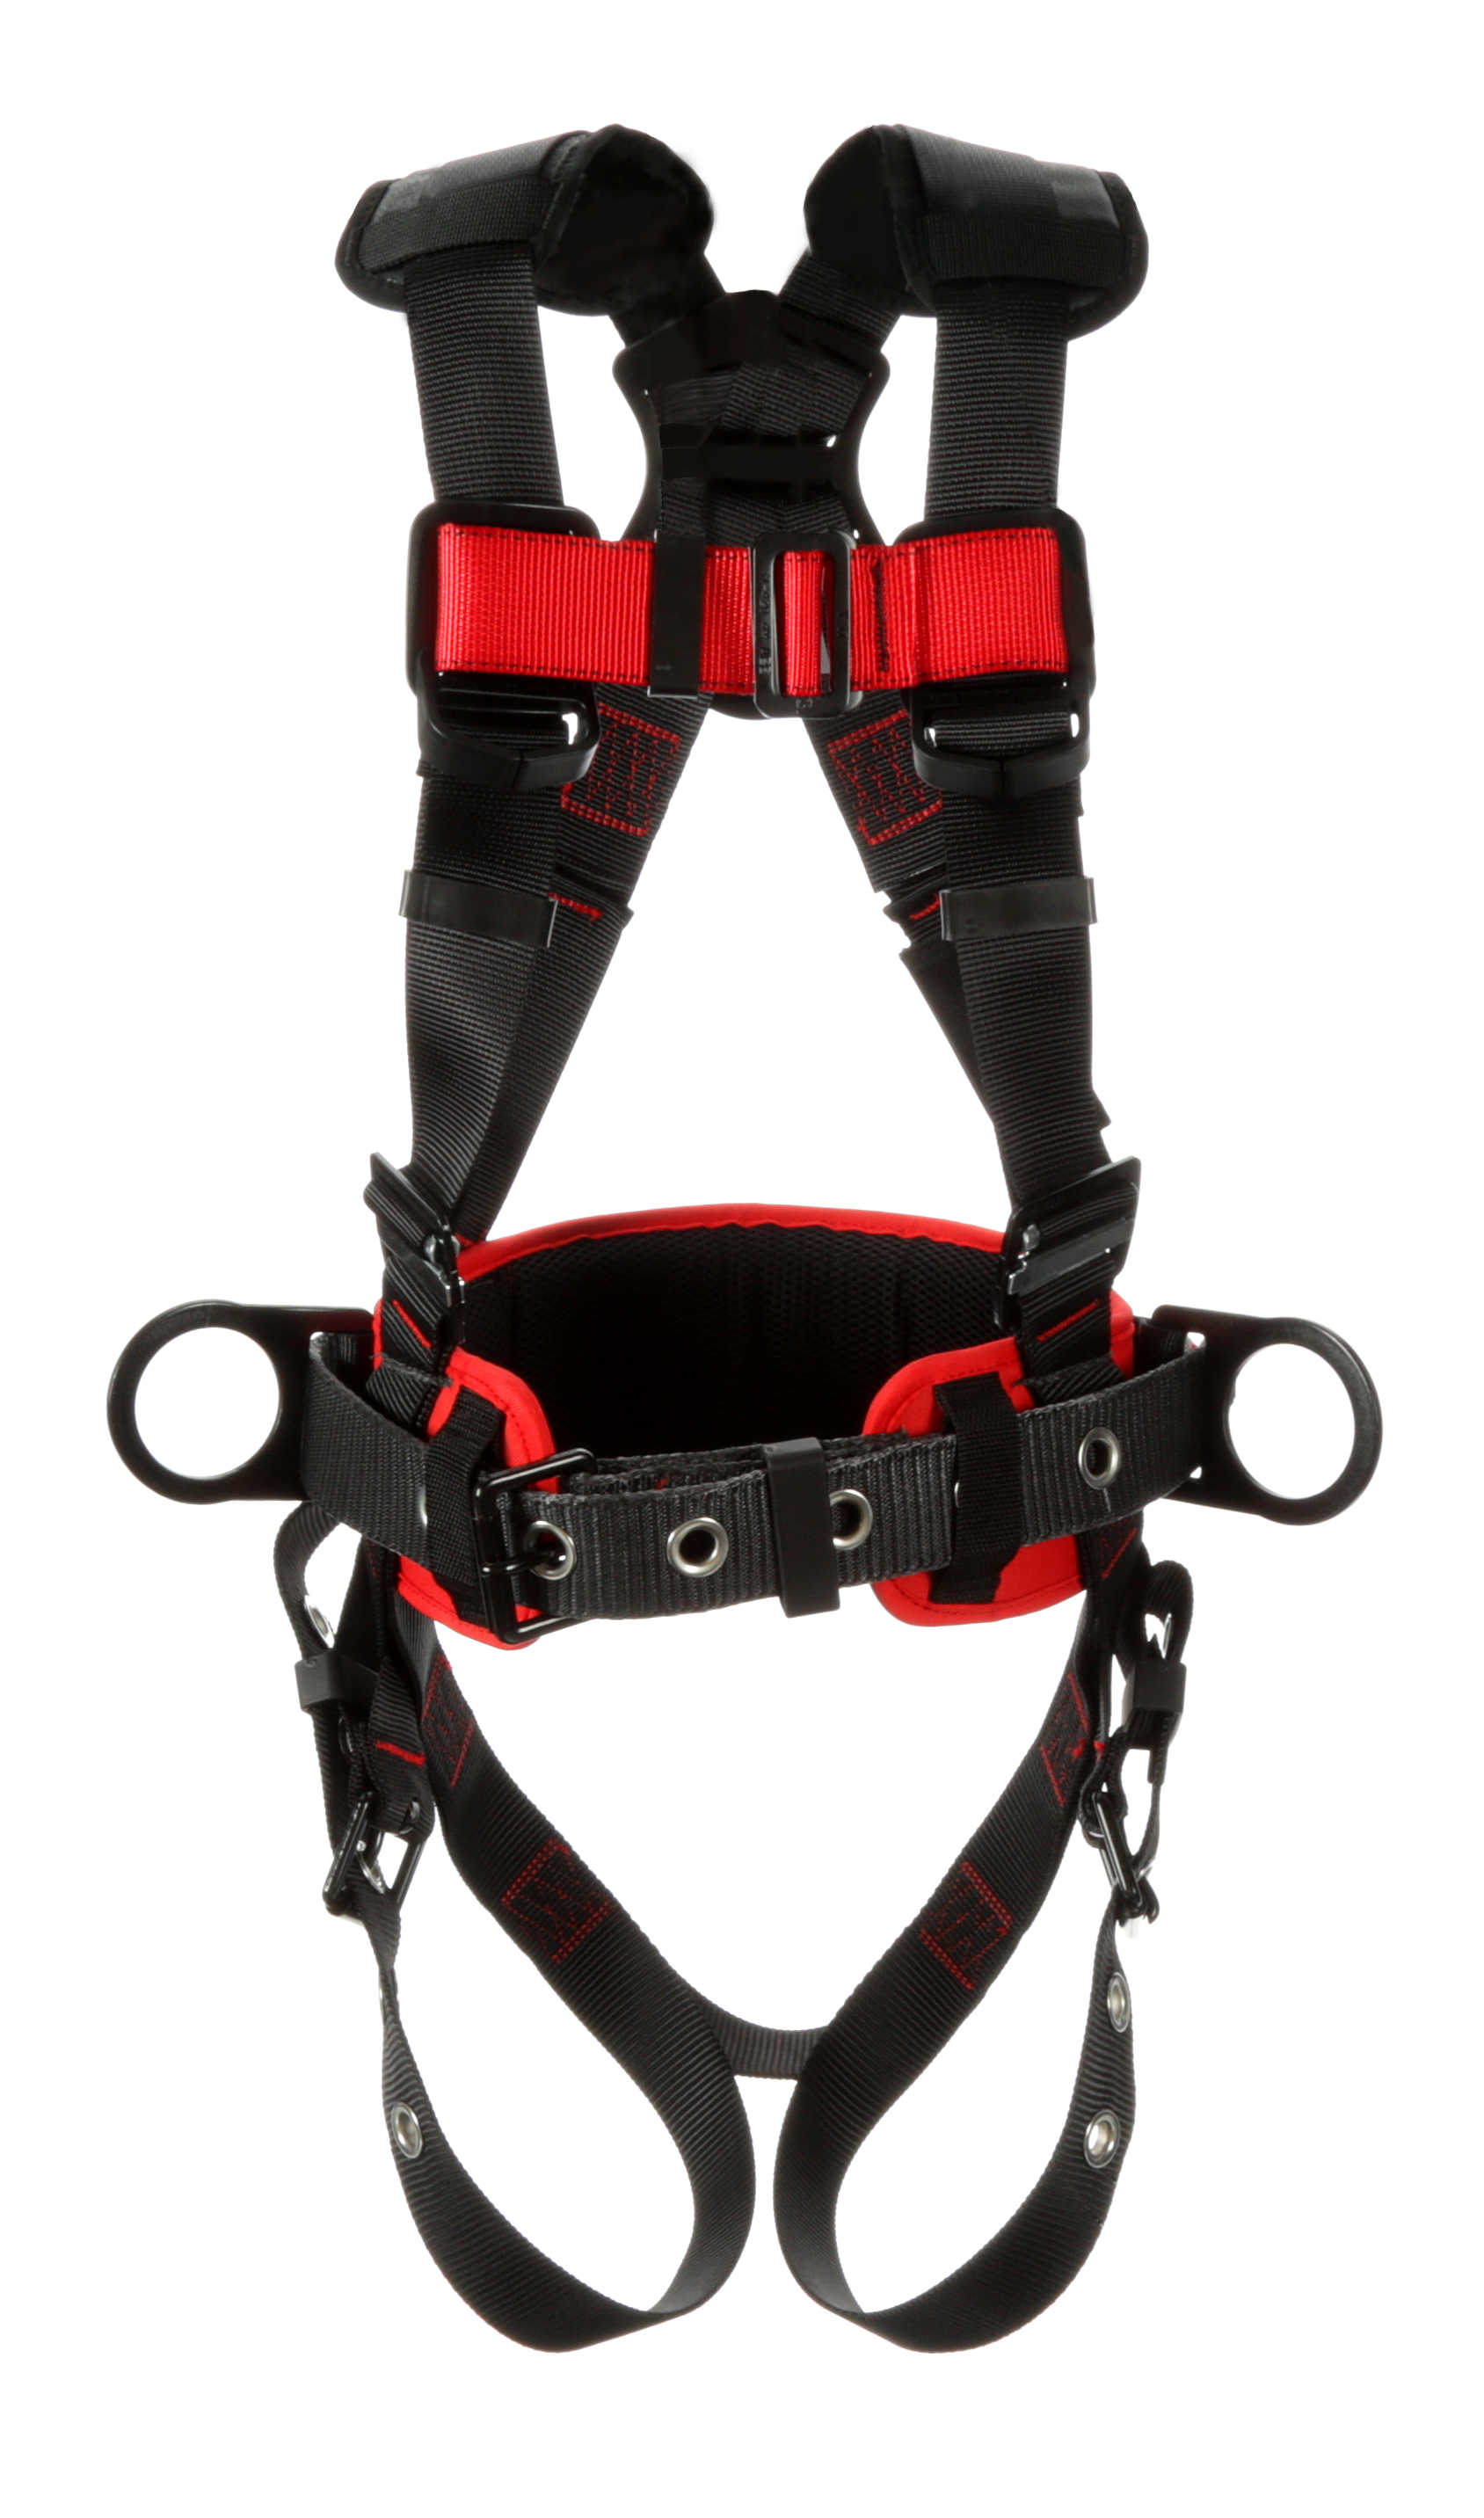 3M  Protecta Standard Construction Harness, Pass-Through Chest,  Tongue-Buckle Legs, Side D-Rings, Medium/Large, 1161309